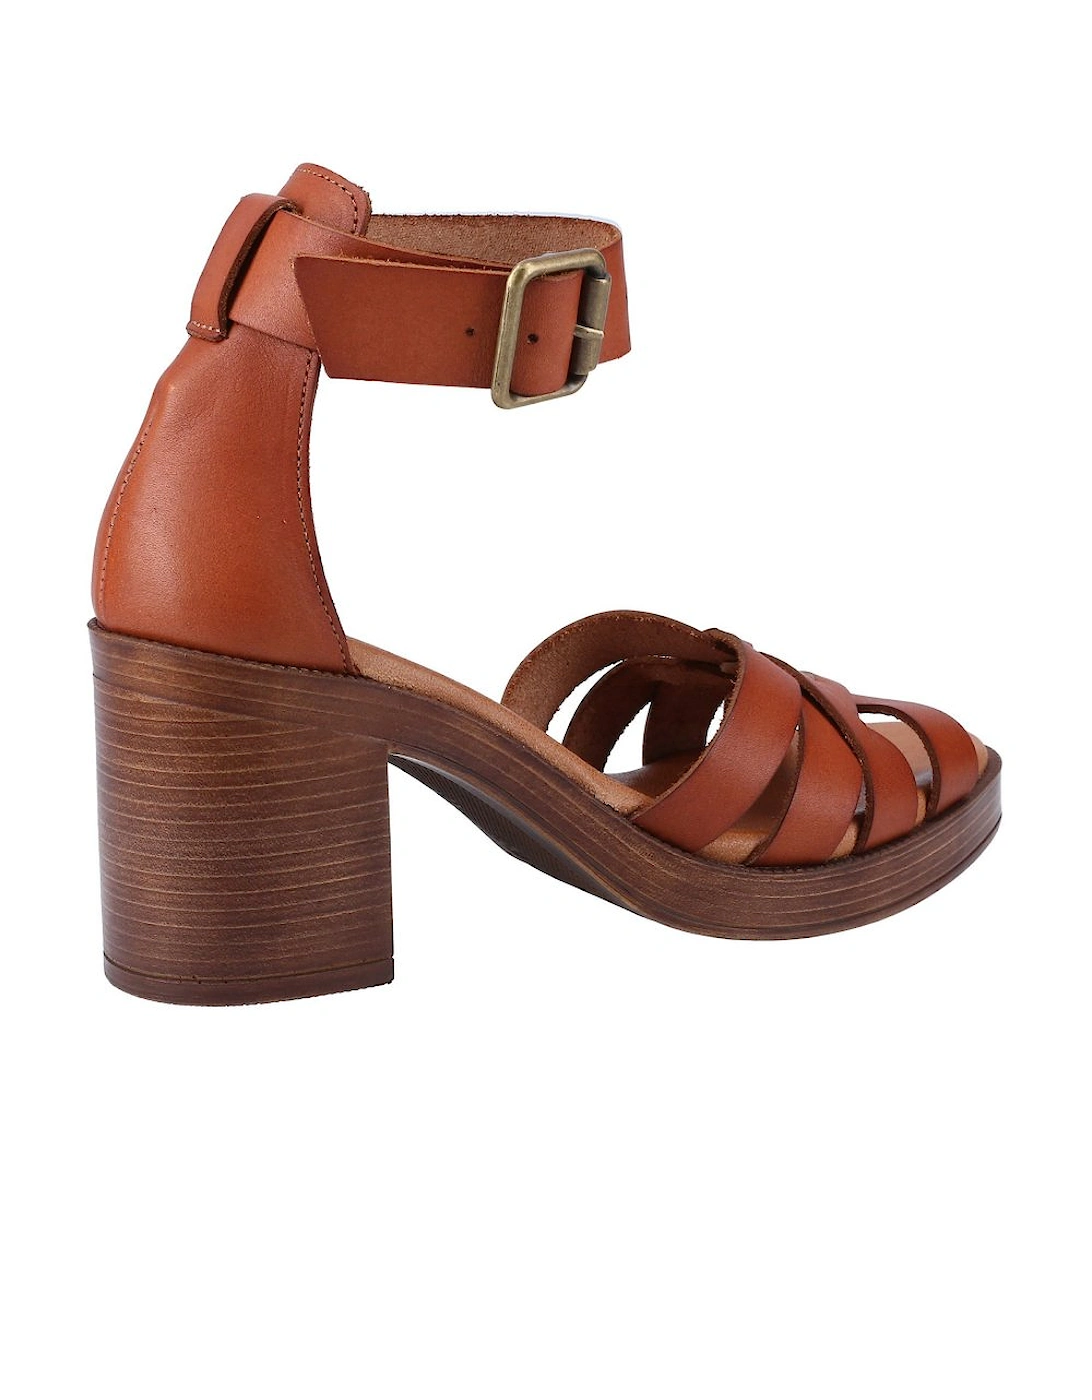 Giselle Womens Sandals